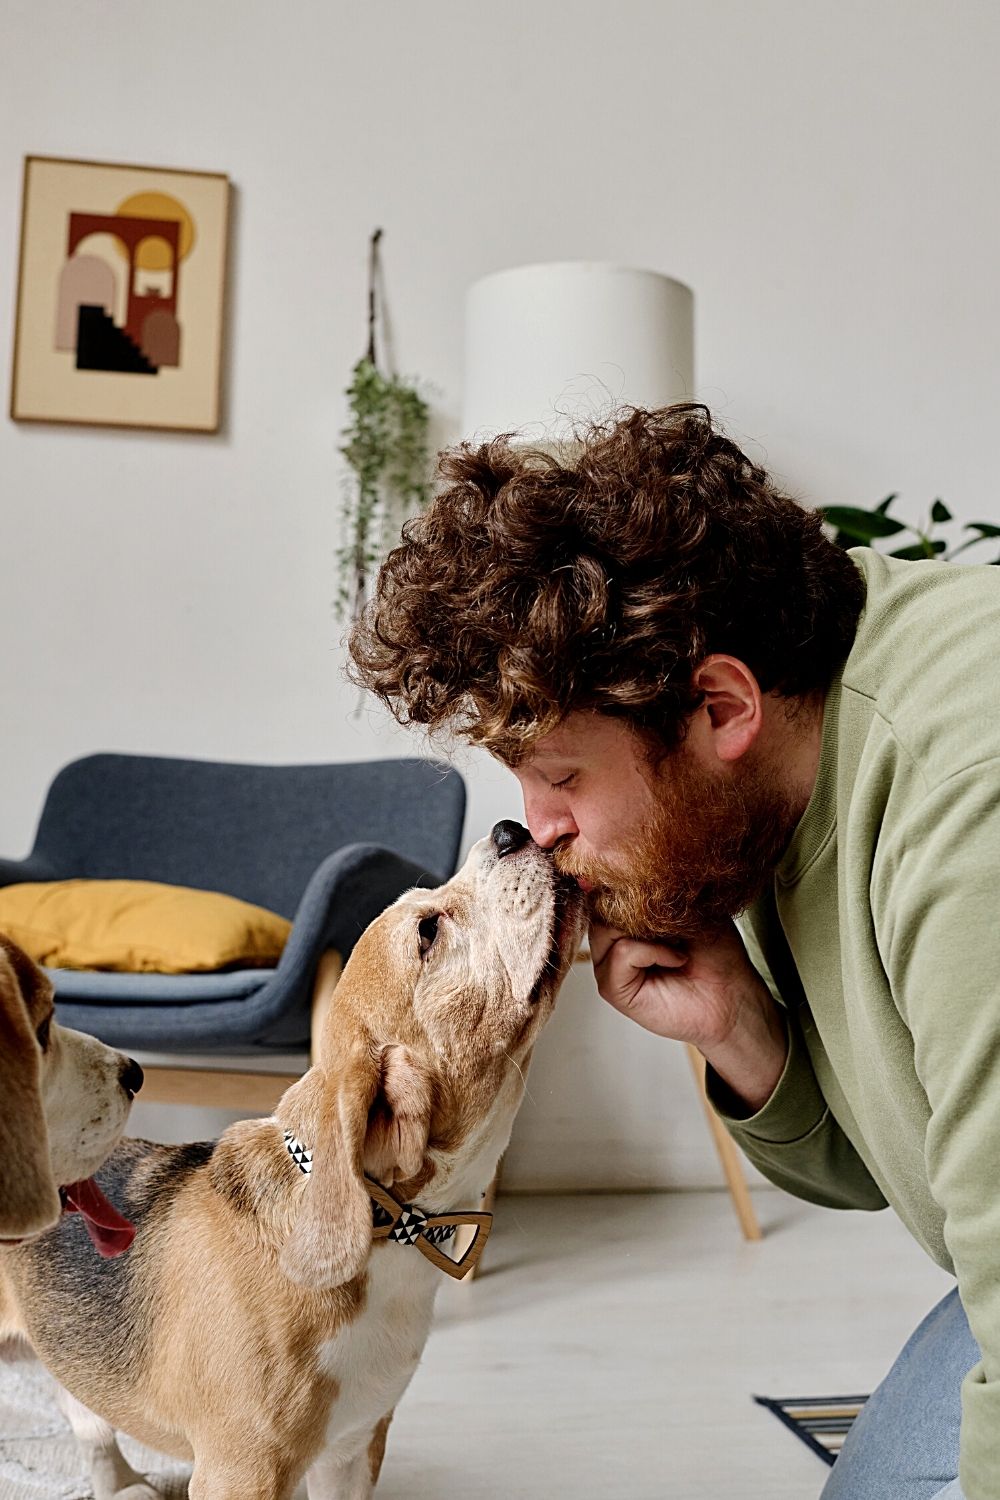 Dogs are humble because once they're bonded to their humans, they'll look to them for guidance